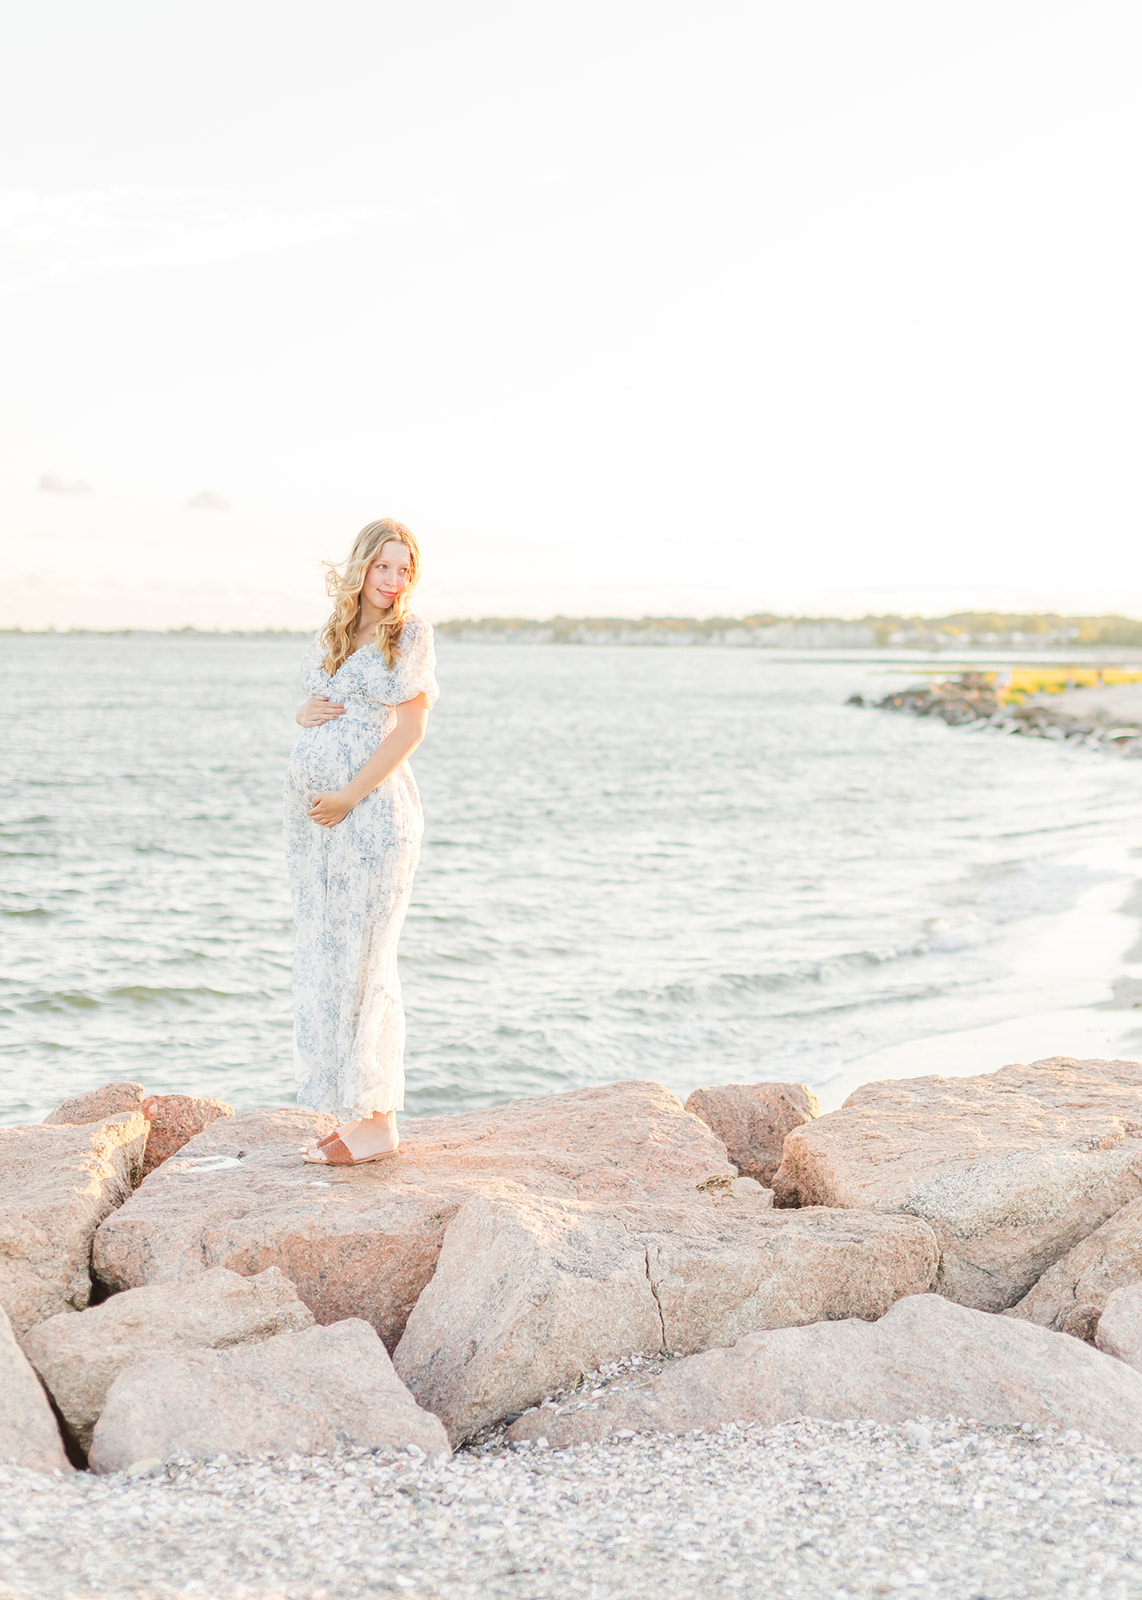 A mom to be stands on a rock seawall at the beach at sunset while holding her bump